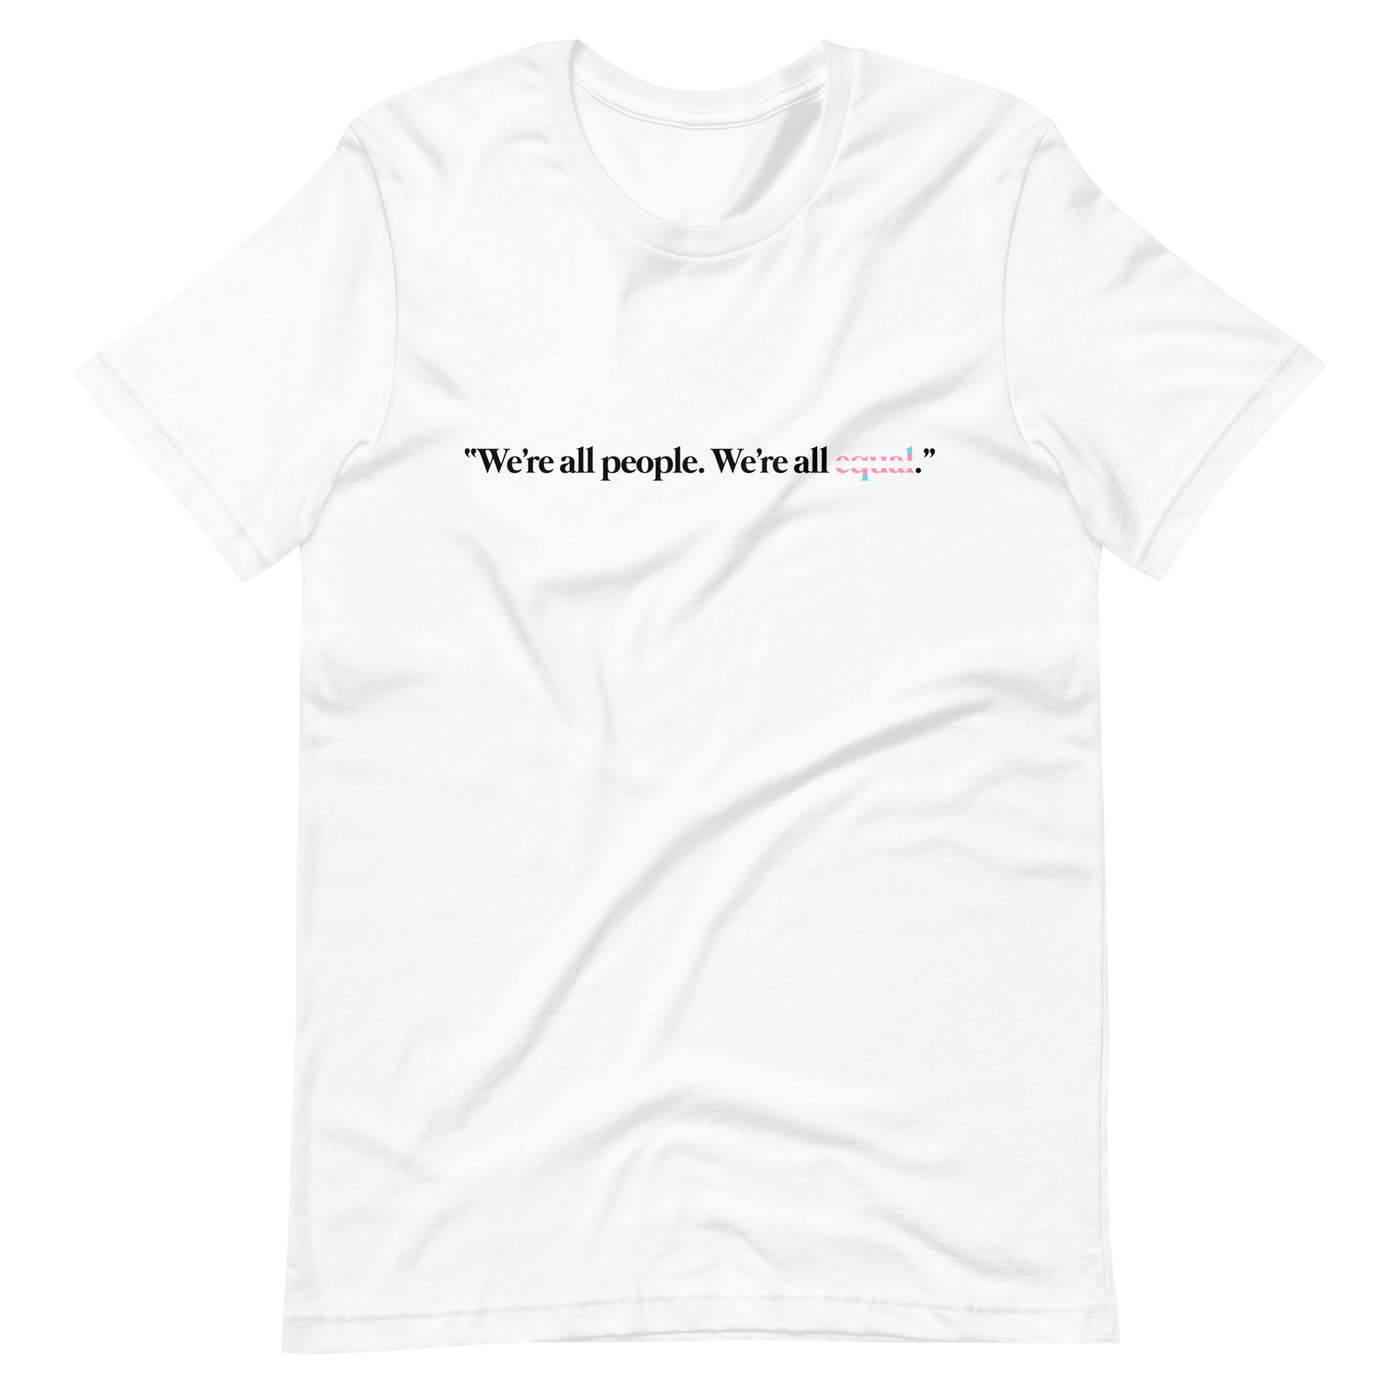 Pride Clothes - We're All People. We're All Equal. Trans Pride T-Shirt - White